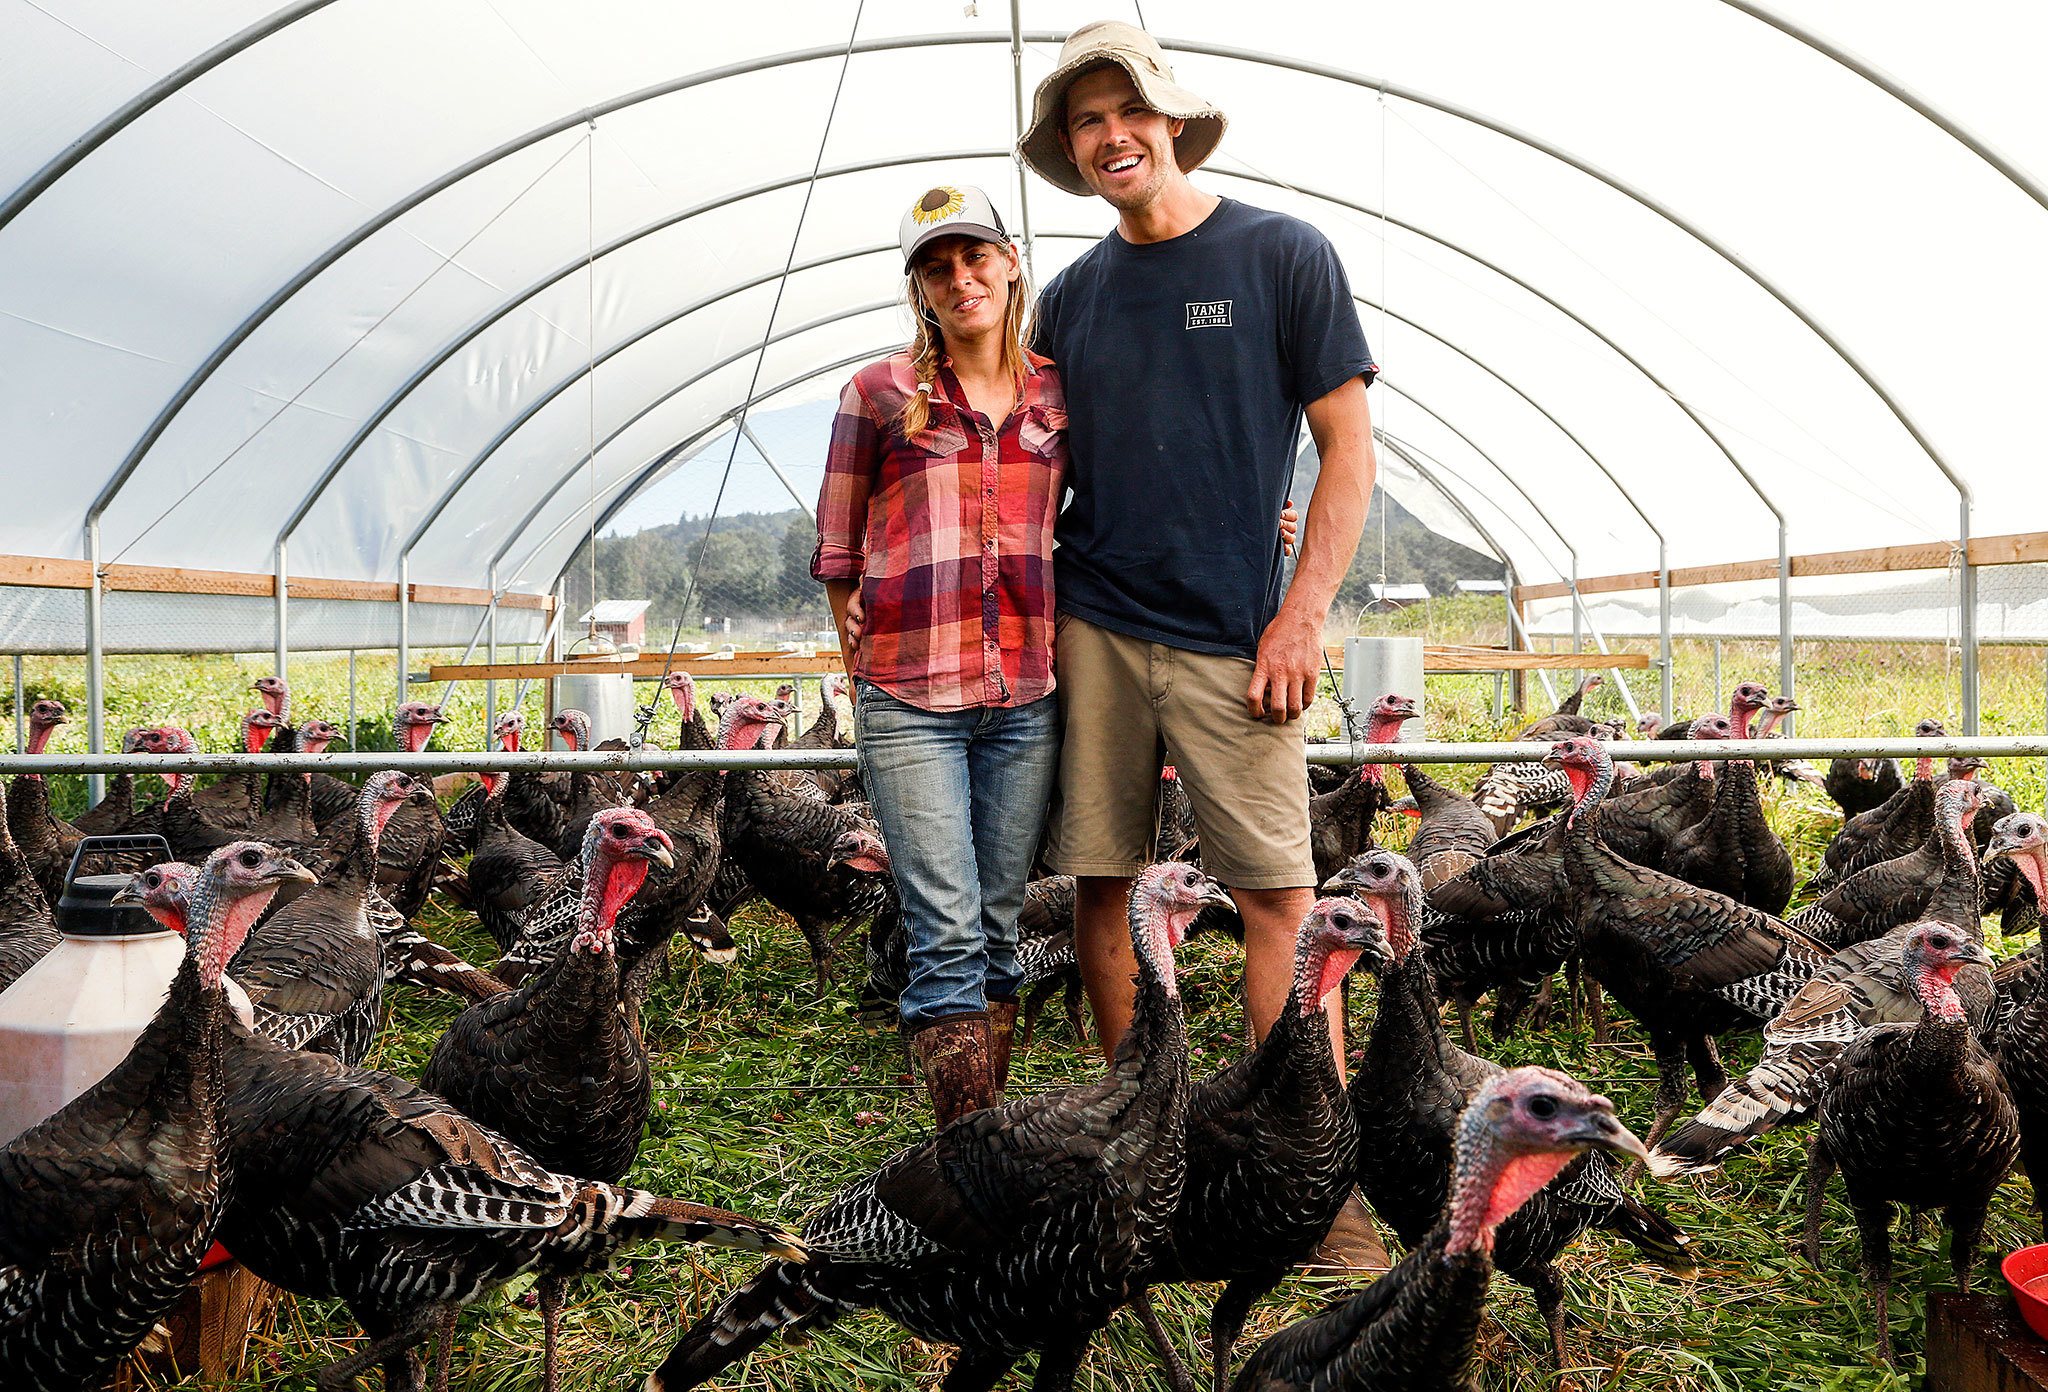 Micha and Andrew Ide, of Bright Ide Acres in Snohomish, began raising heritage turkeys a couple of years ago, and have sold out every year. (Dan Bates / The Herald)